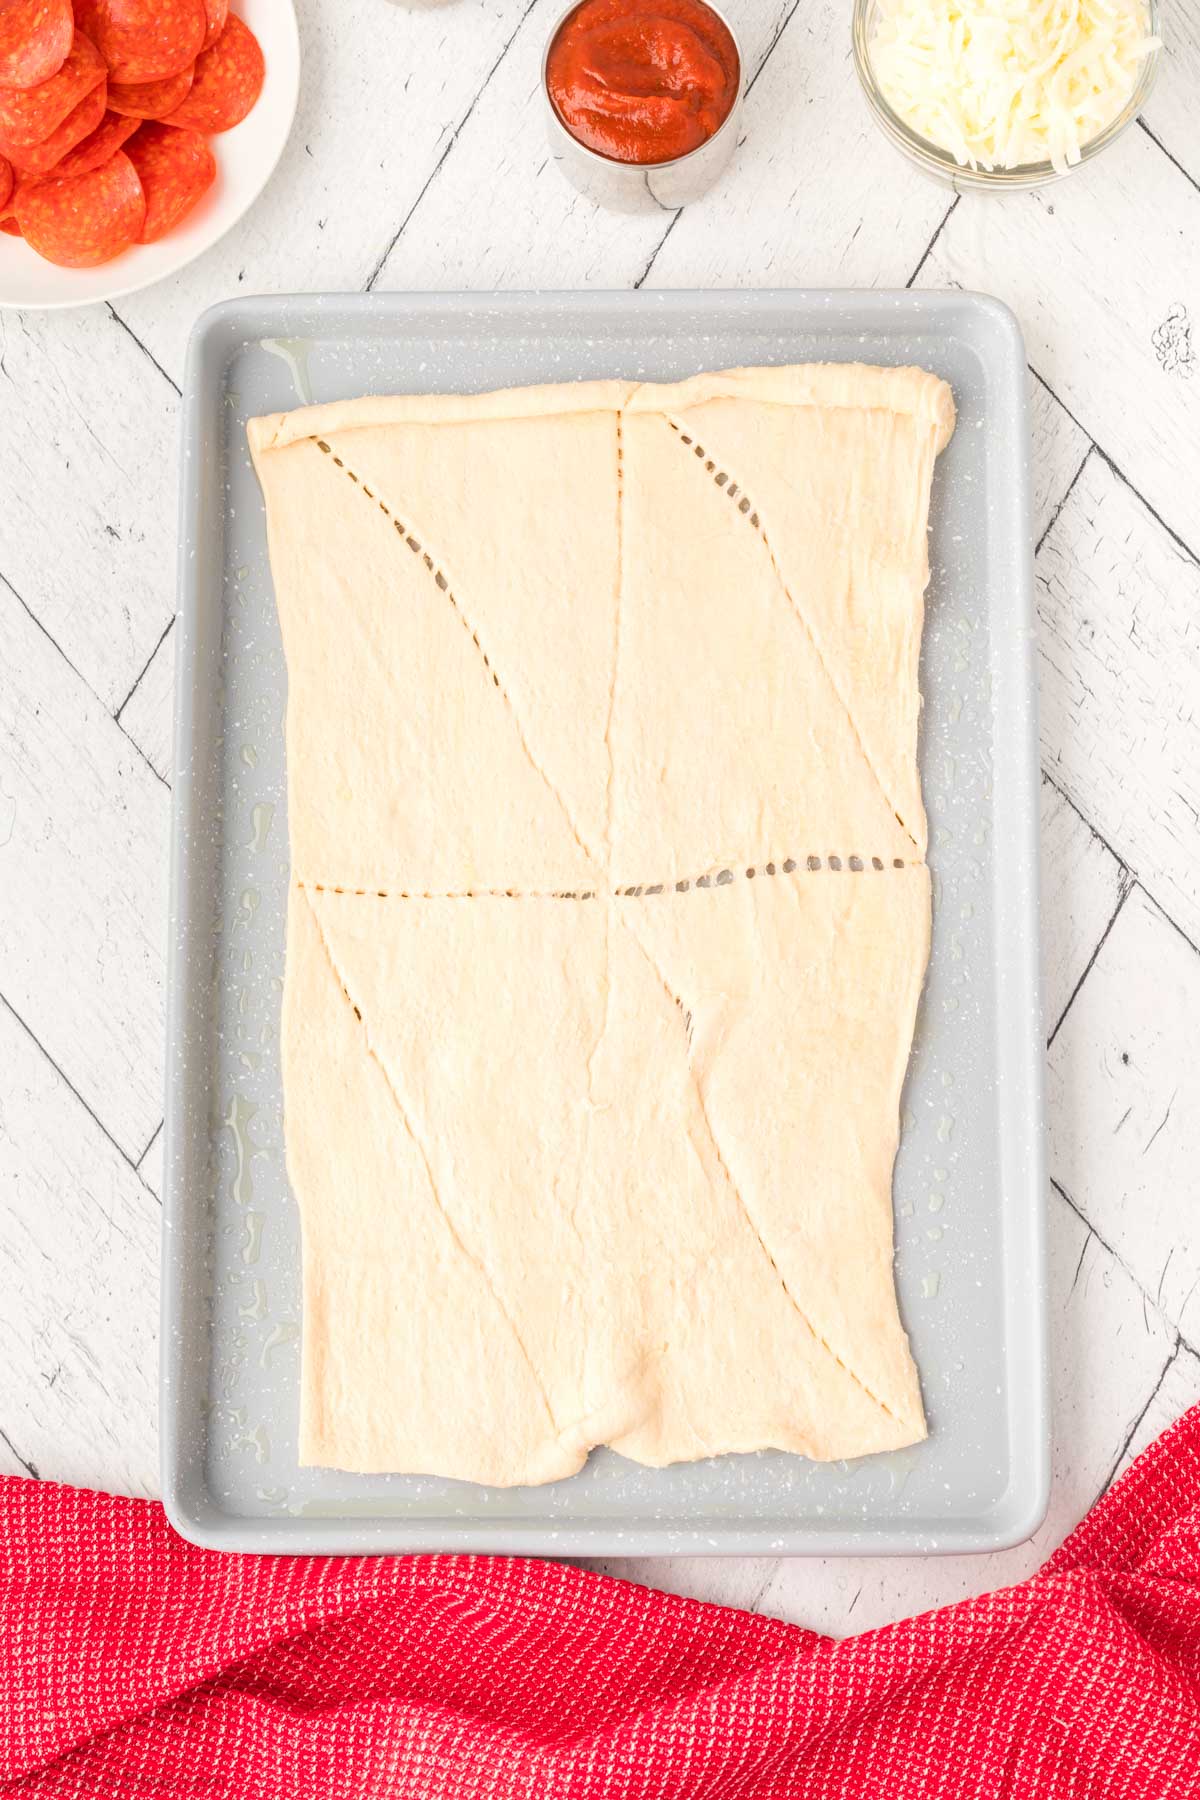 Crescent roll rolled out on a baking sheet